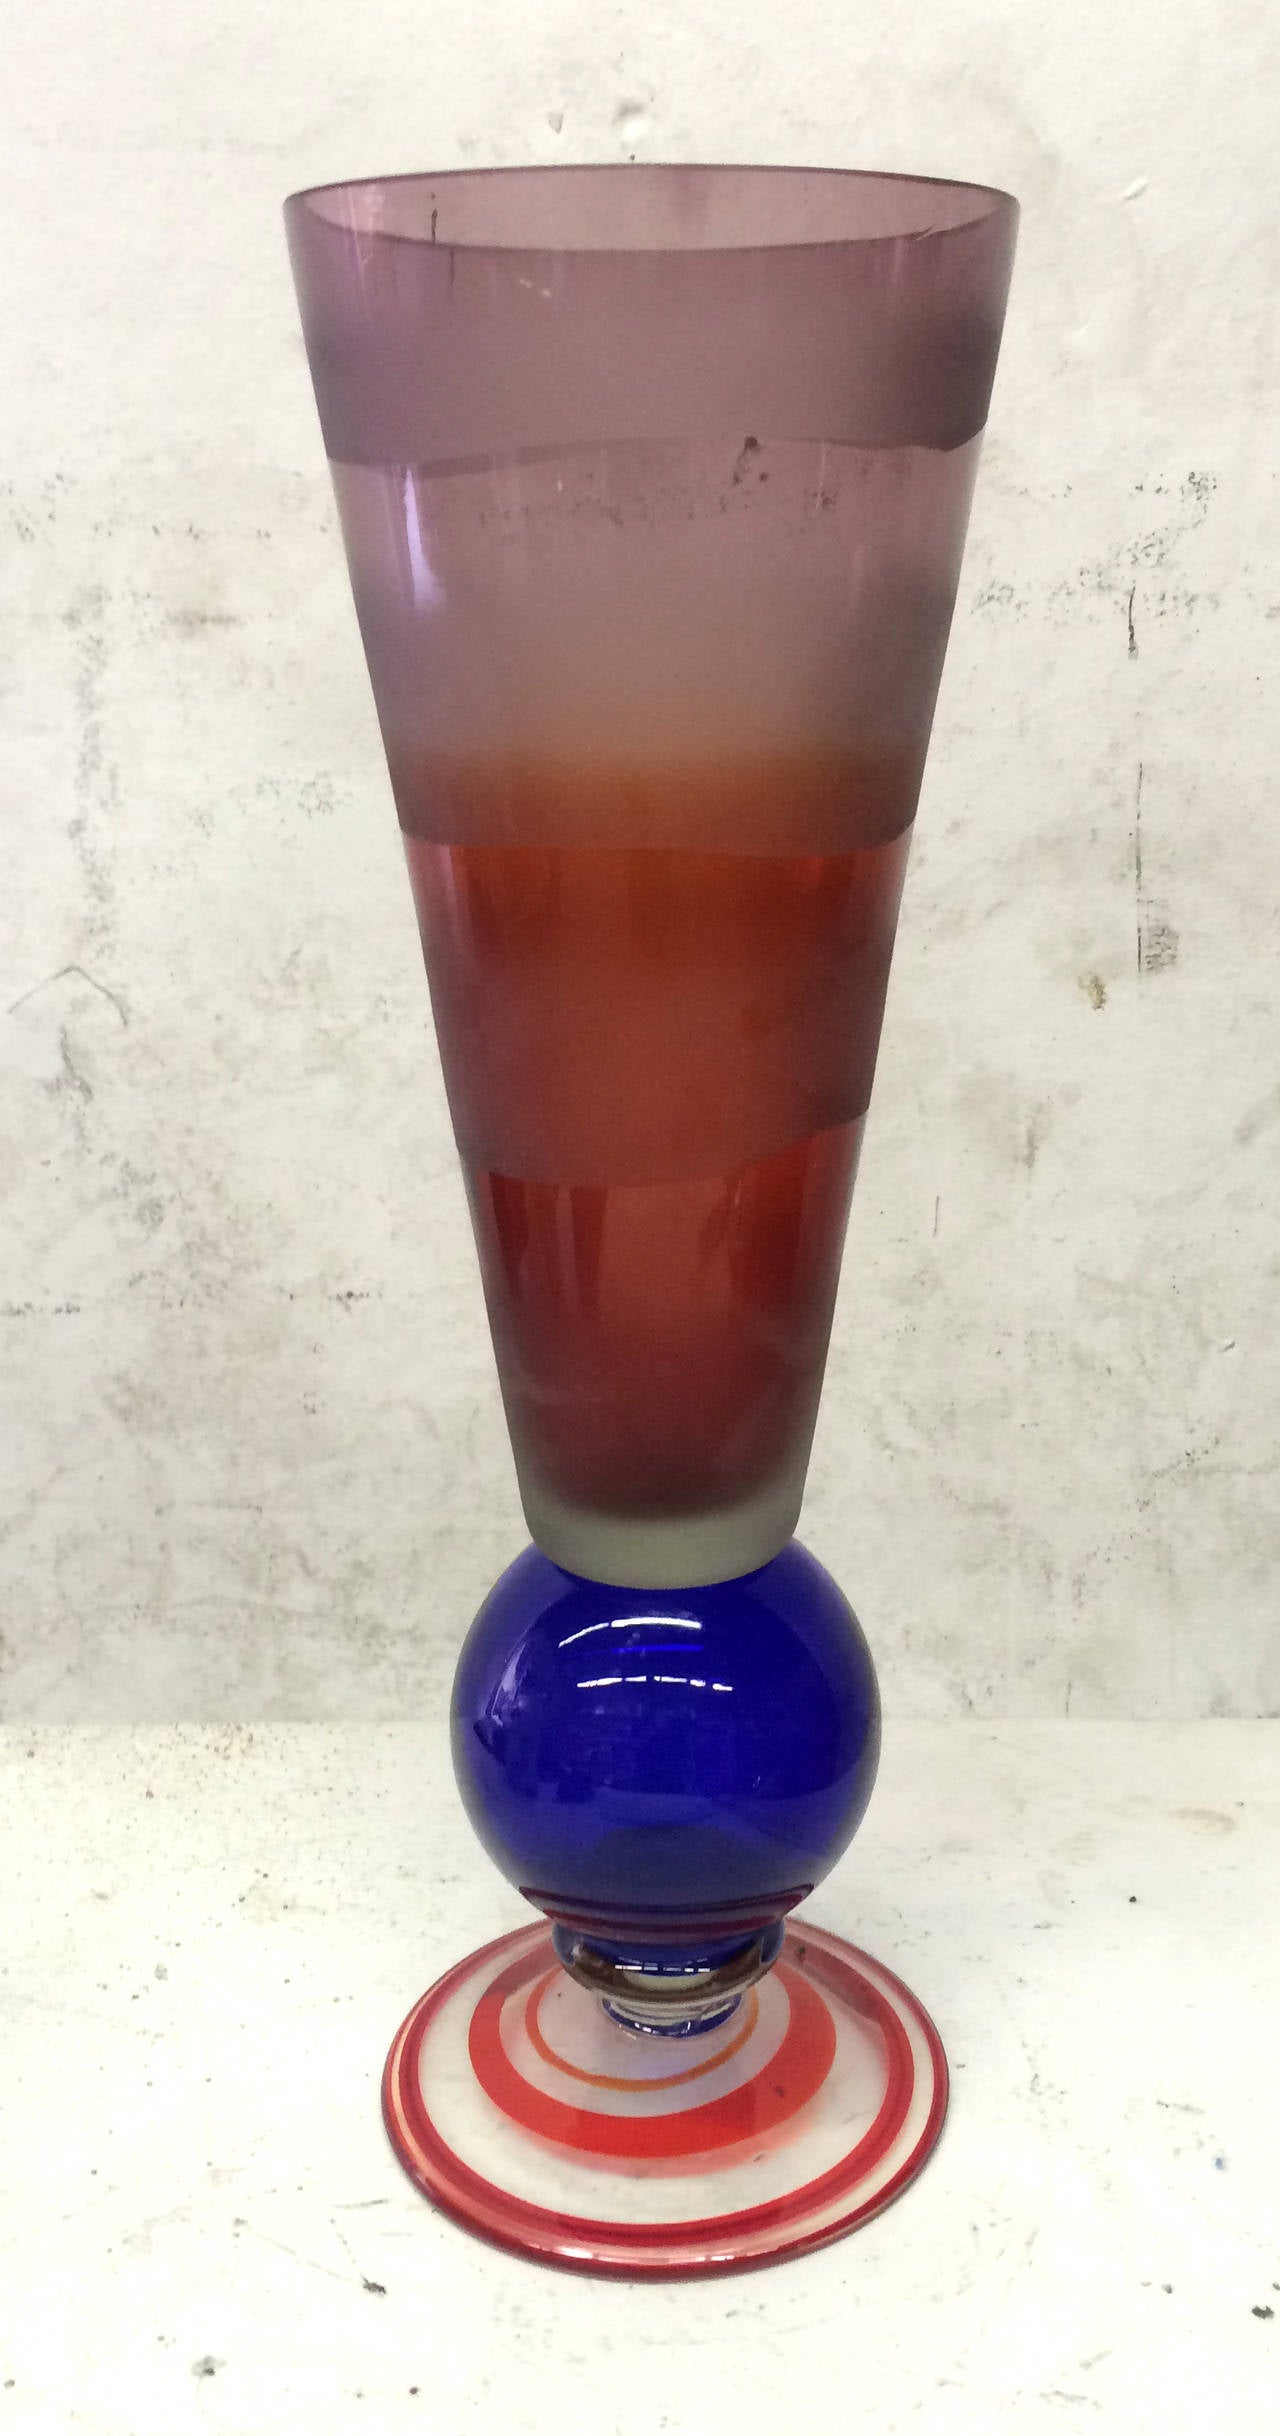 A fun Memphis Group-inspired colorful glass vase with contrasting shapes that seem to be stacked. The wide circular base is clear glass with swirling orange stripes, surmounted by a cobalt sphere that supports a purple and red semi-frosted